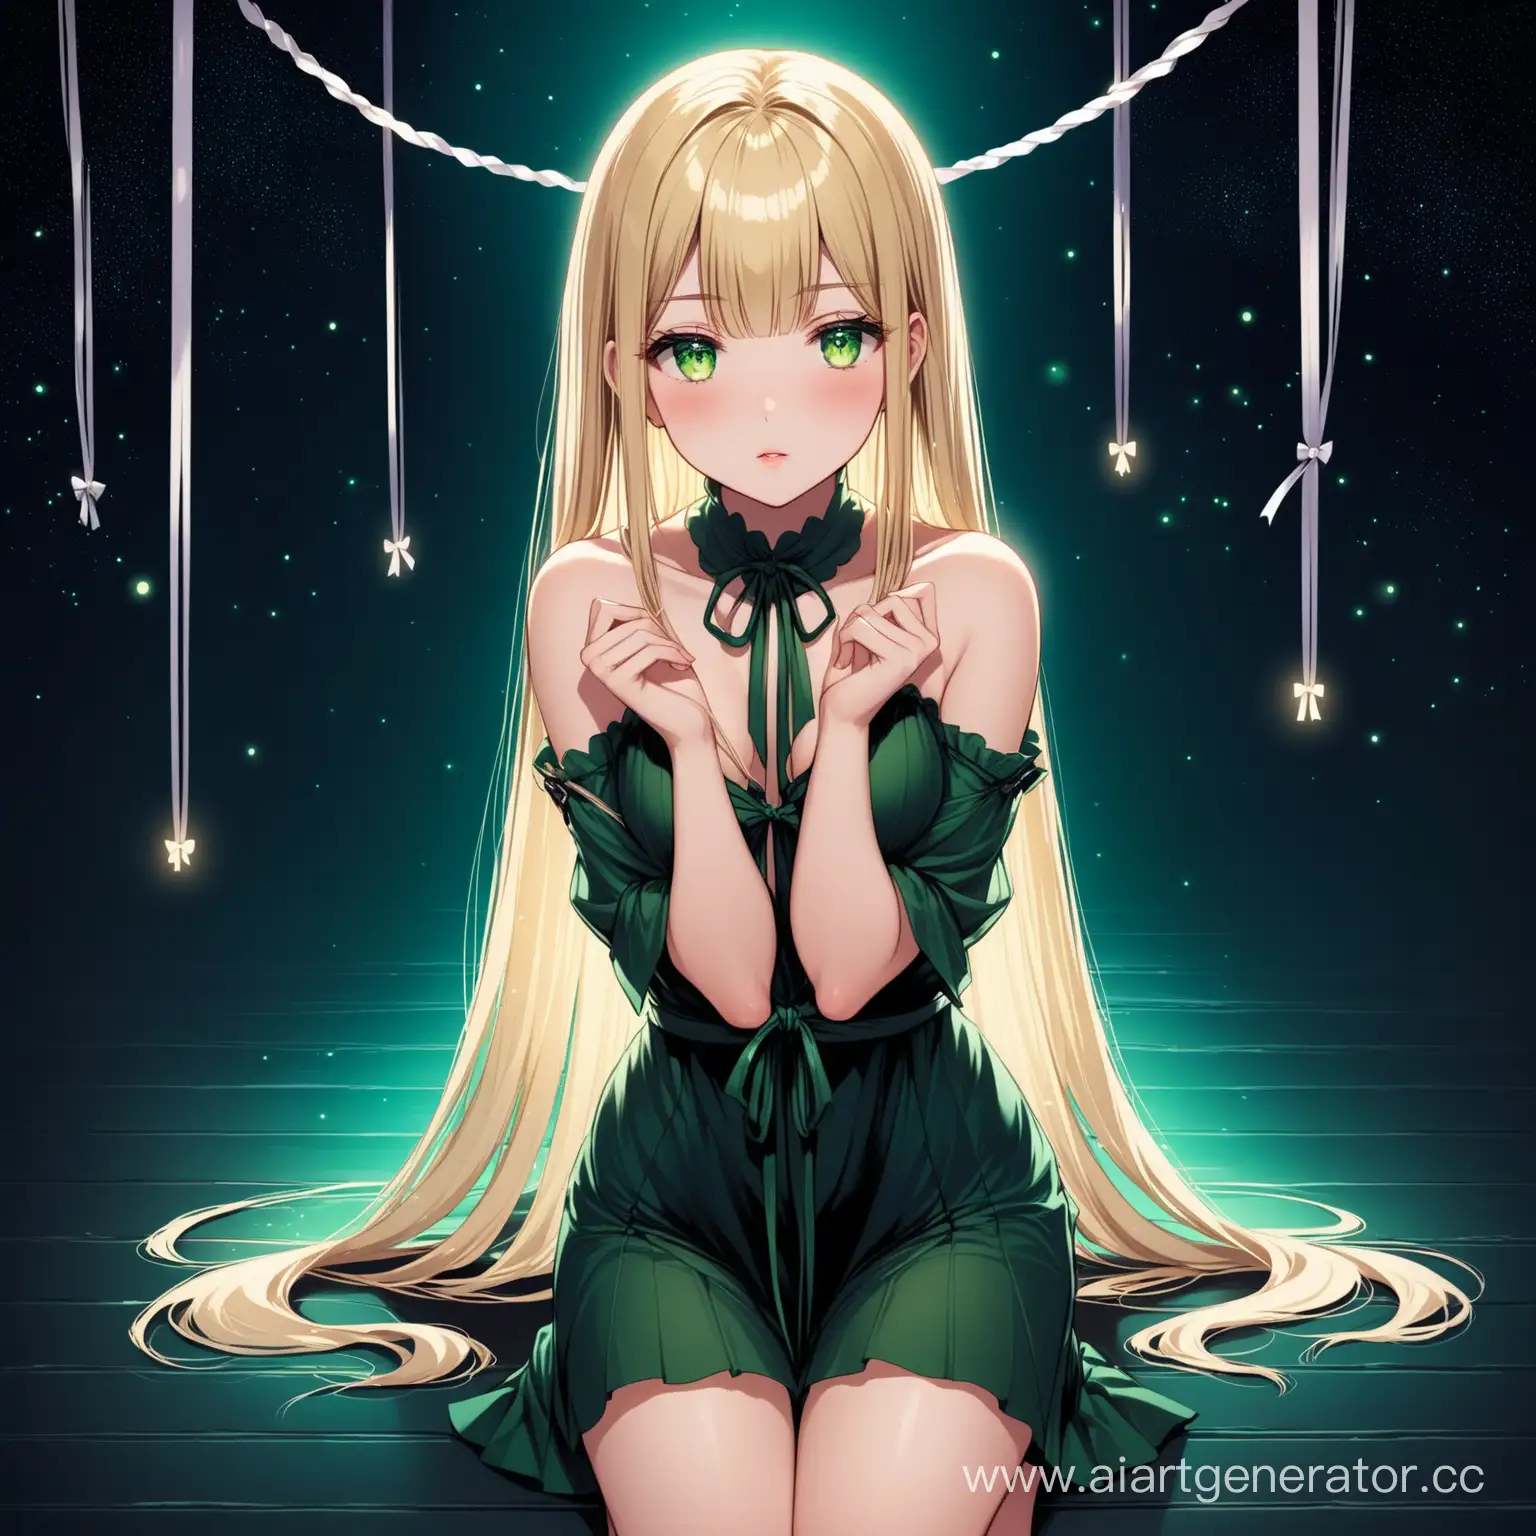 Captivating-Blonde-Girl-Bound-with-Ribbons-in-Enigmatic-Night-Scene